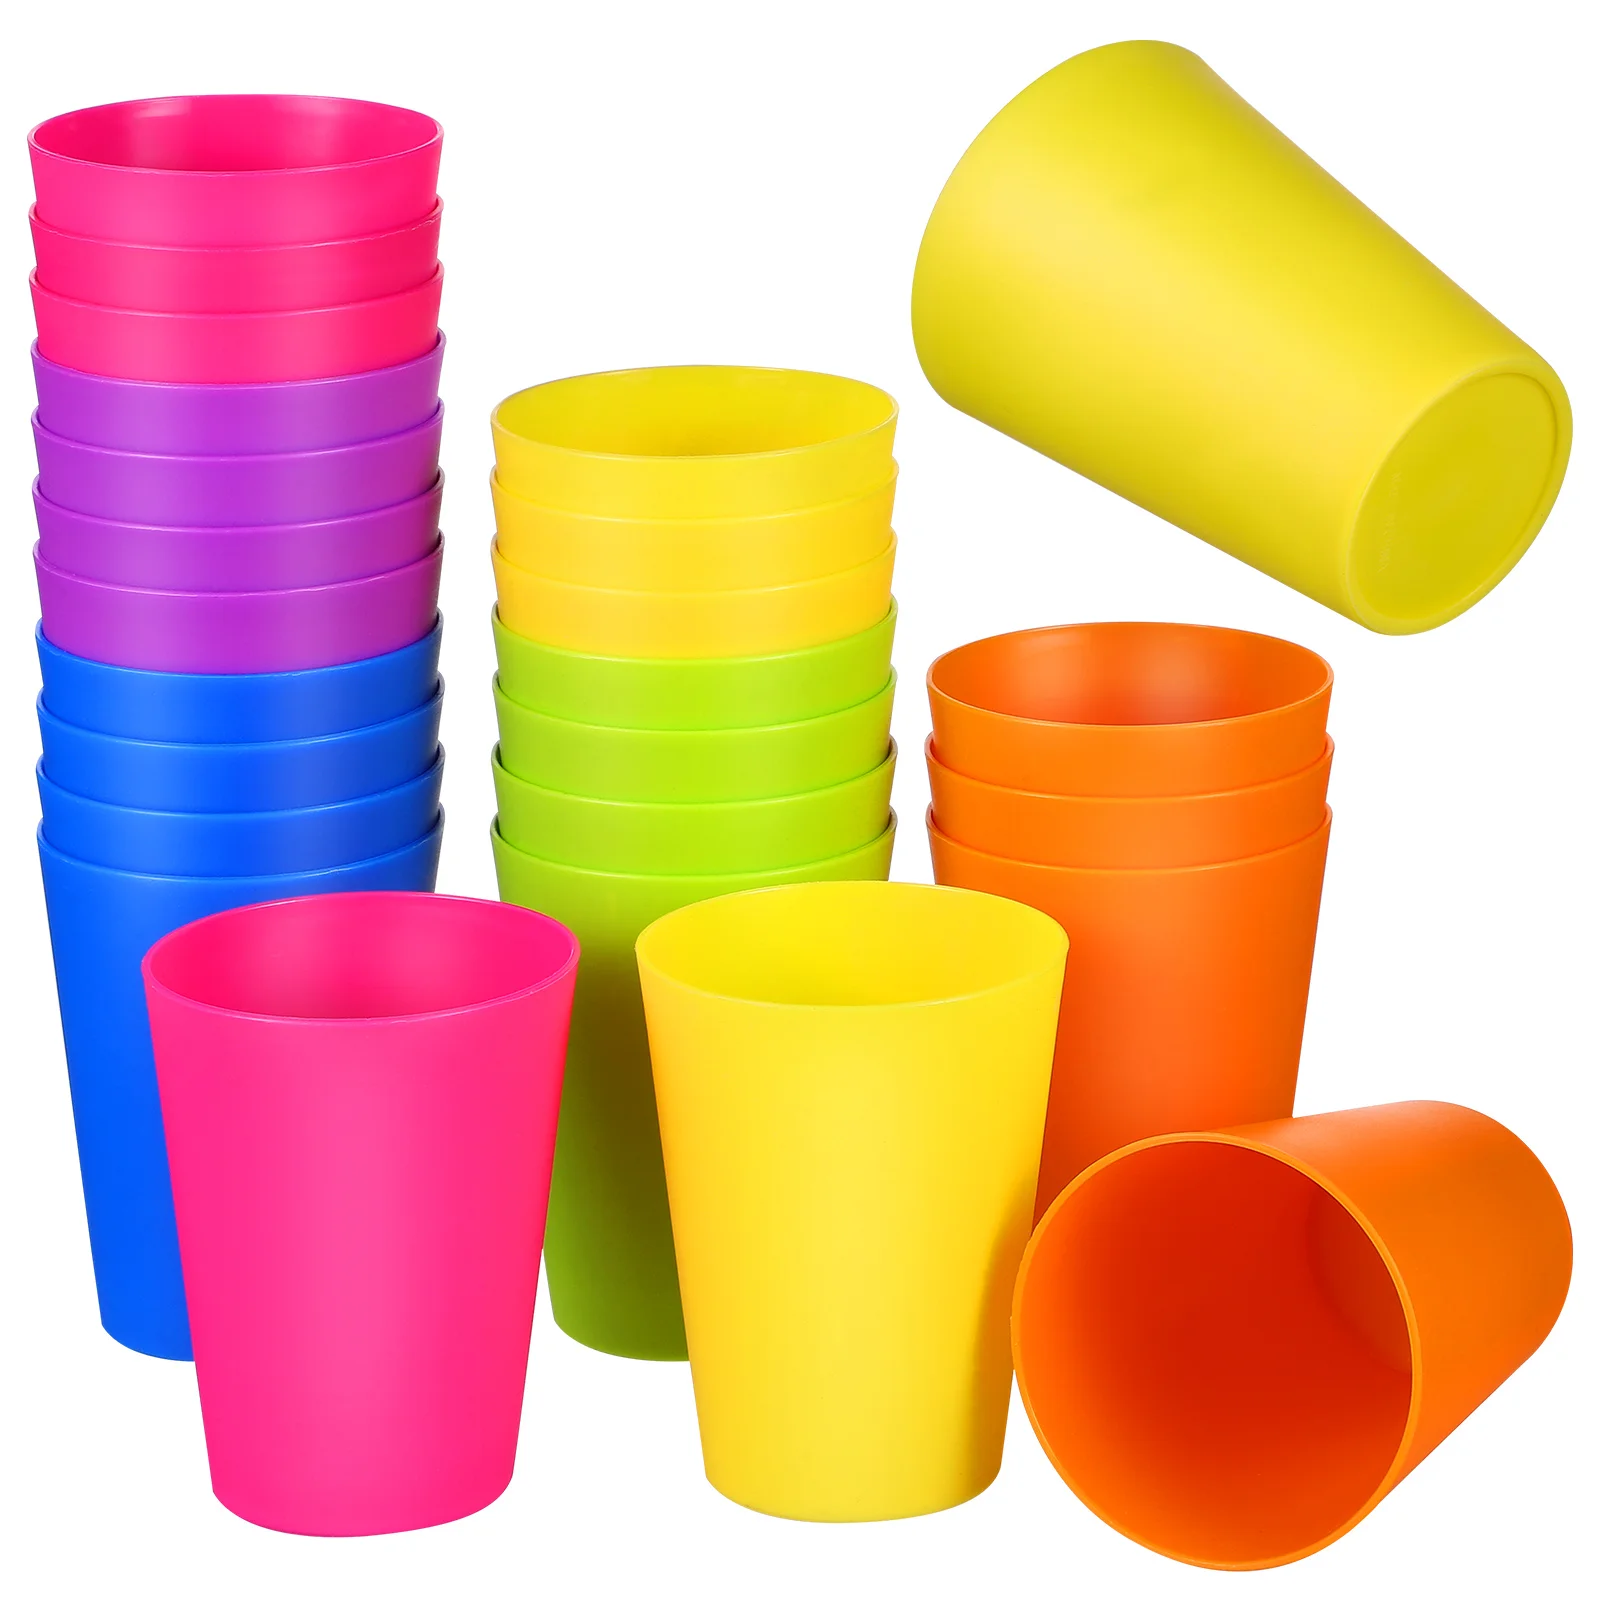 24 Pcs Small Plastic Cups Reusable Coffee Mug Tumbler Colorful Drinking For Kids Colored Kitchen 8 Oz Rainbow